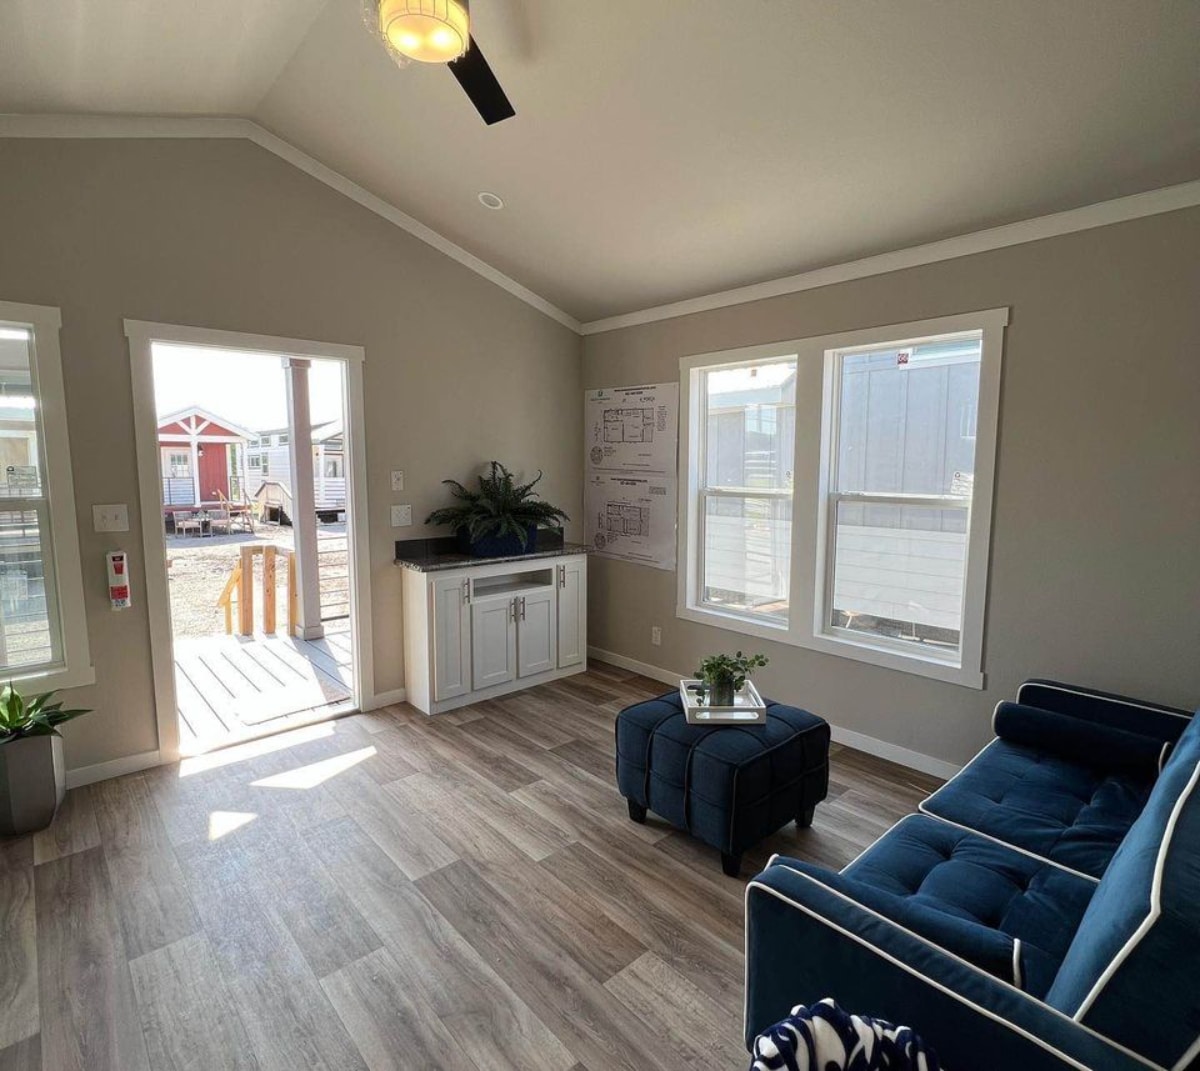 Spacious living area of 32' Ranch Style Tiny Home has a couch, coffee table and wall unit